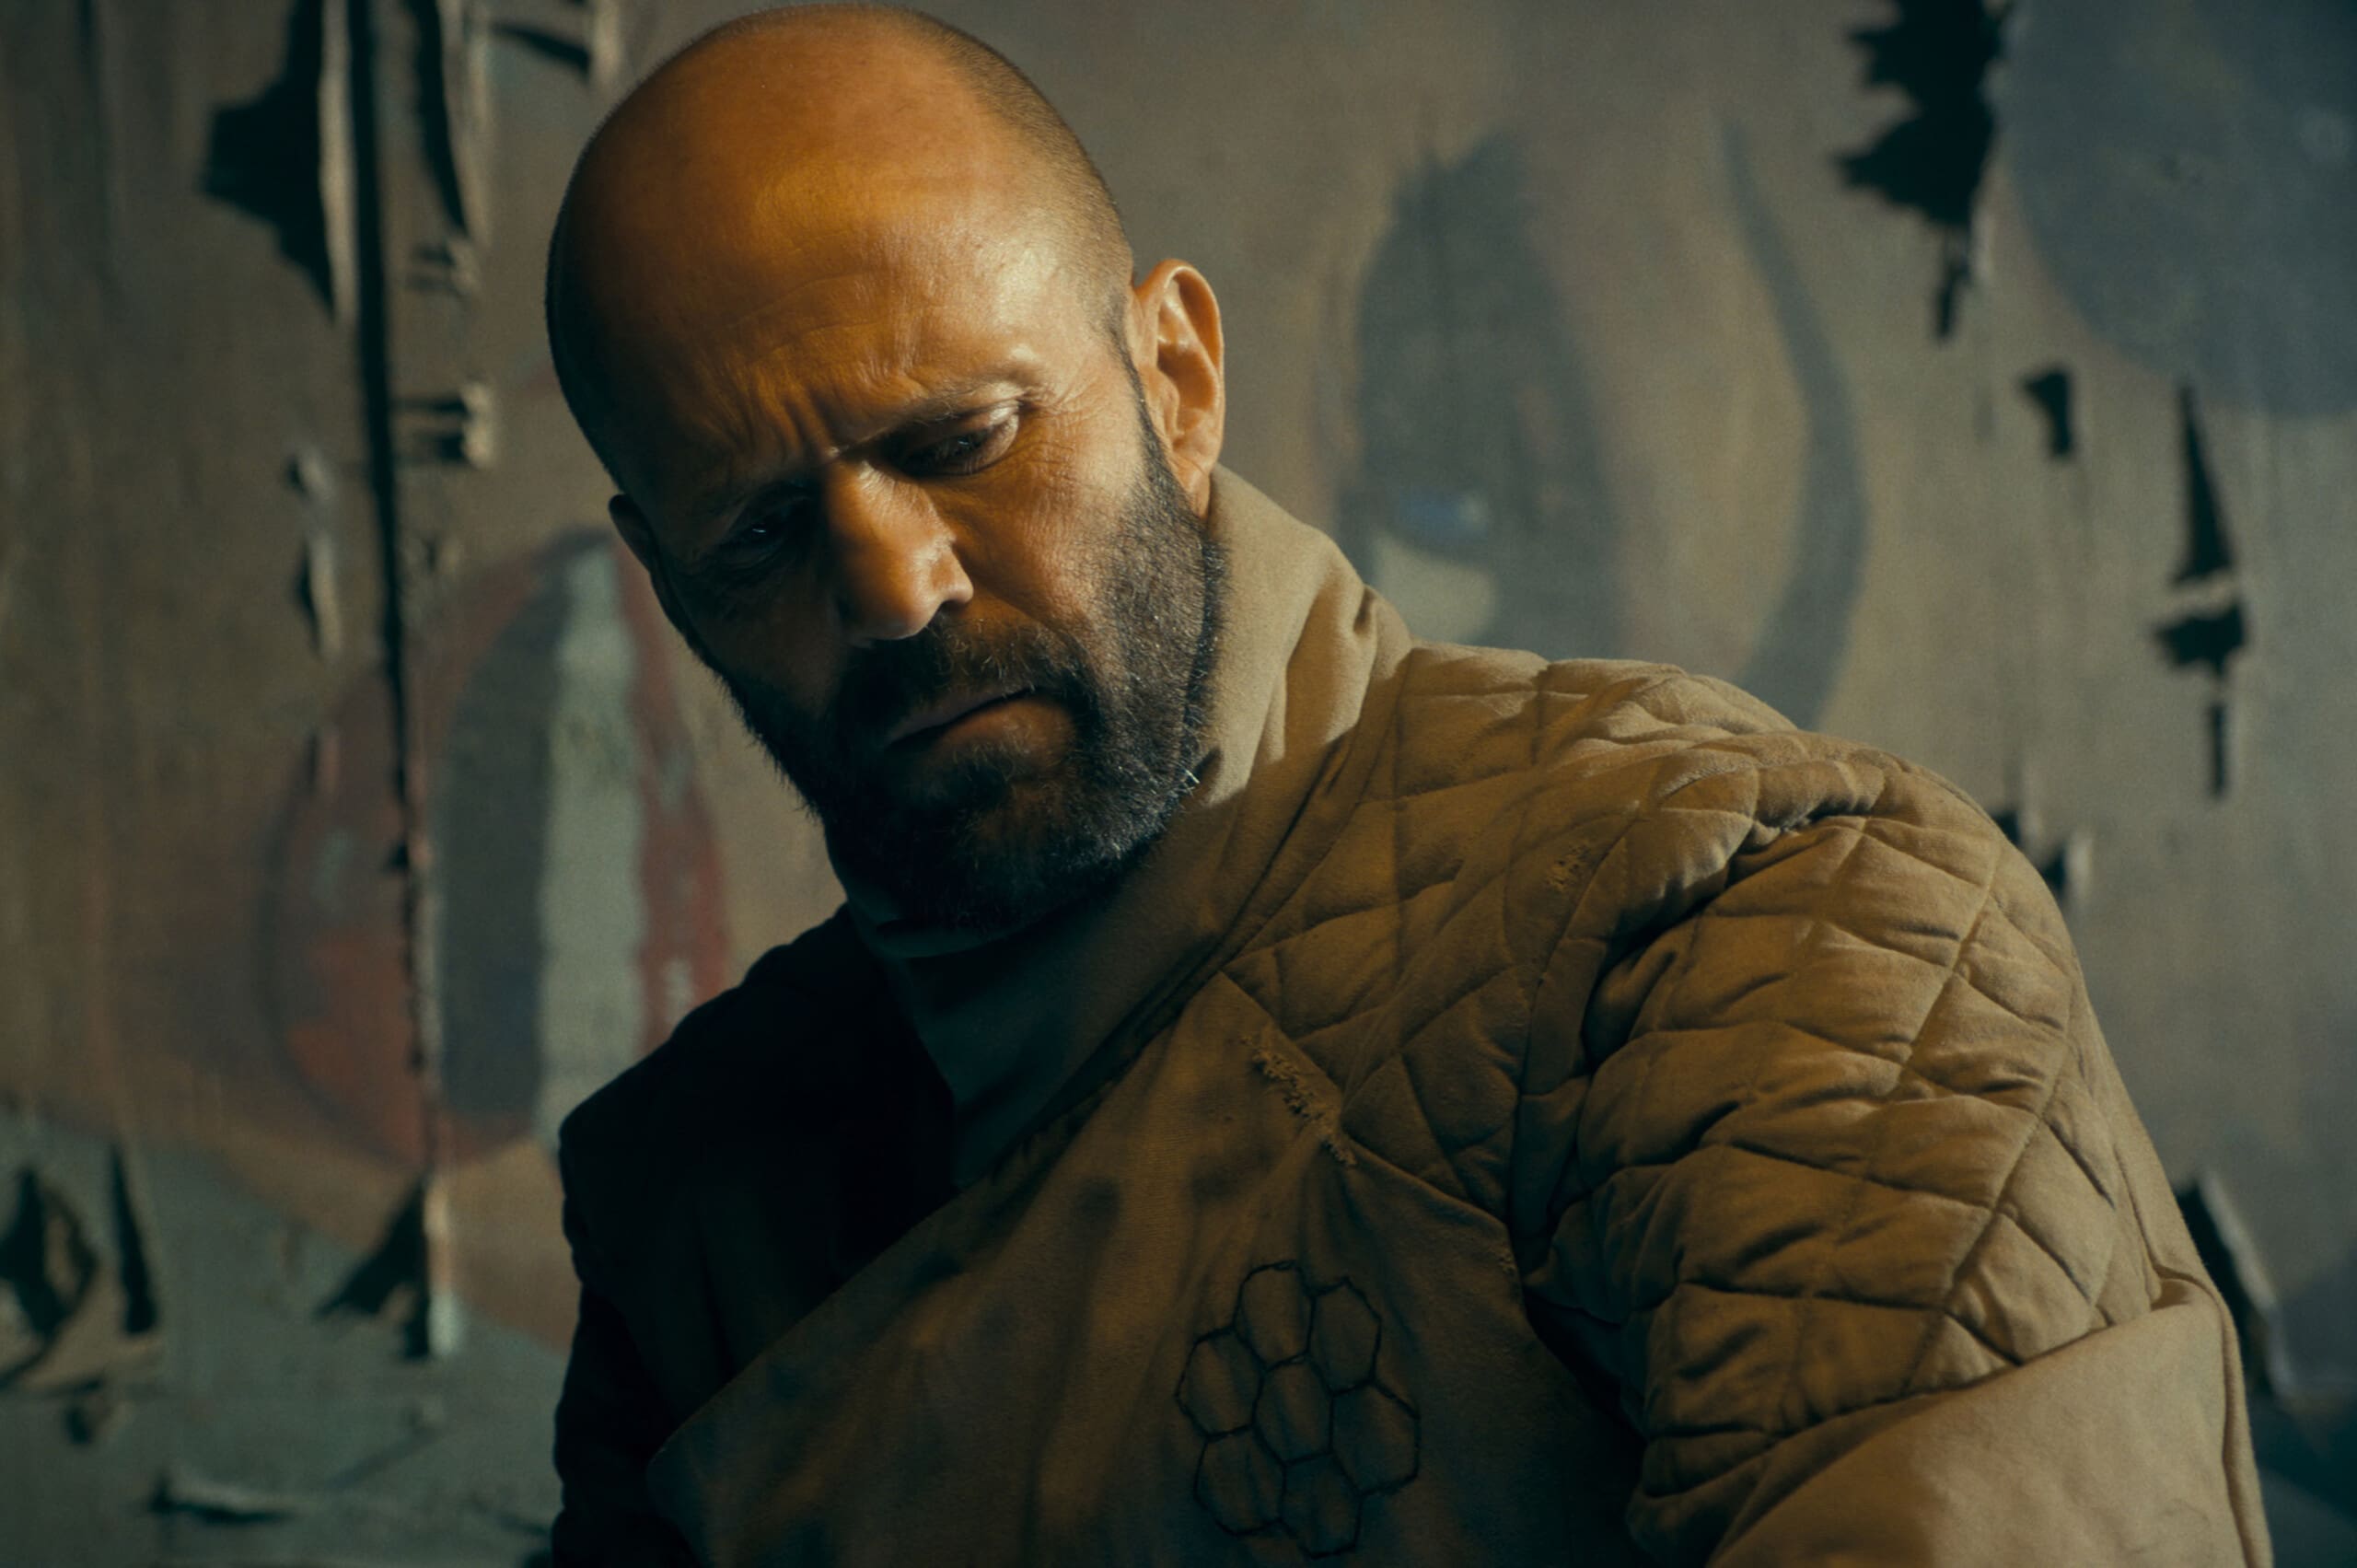 Jason Statham stars as Clay in director David Ayer's THE BEEKEEPER. An Amazon MGM Studios film.